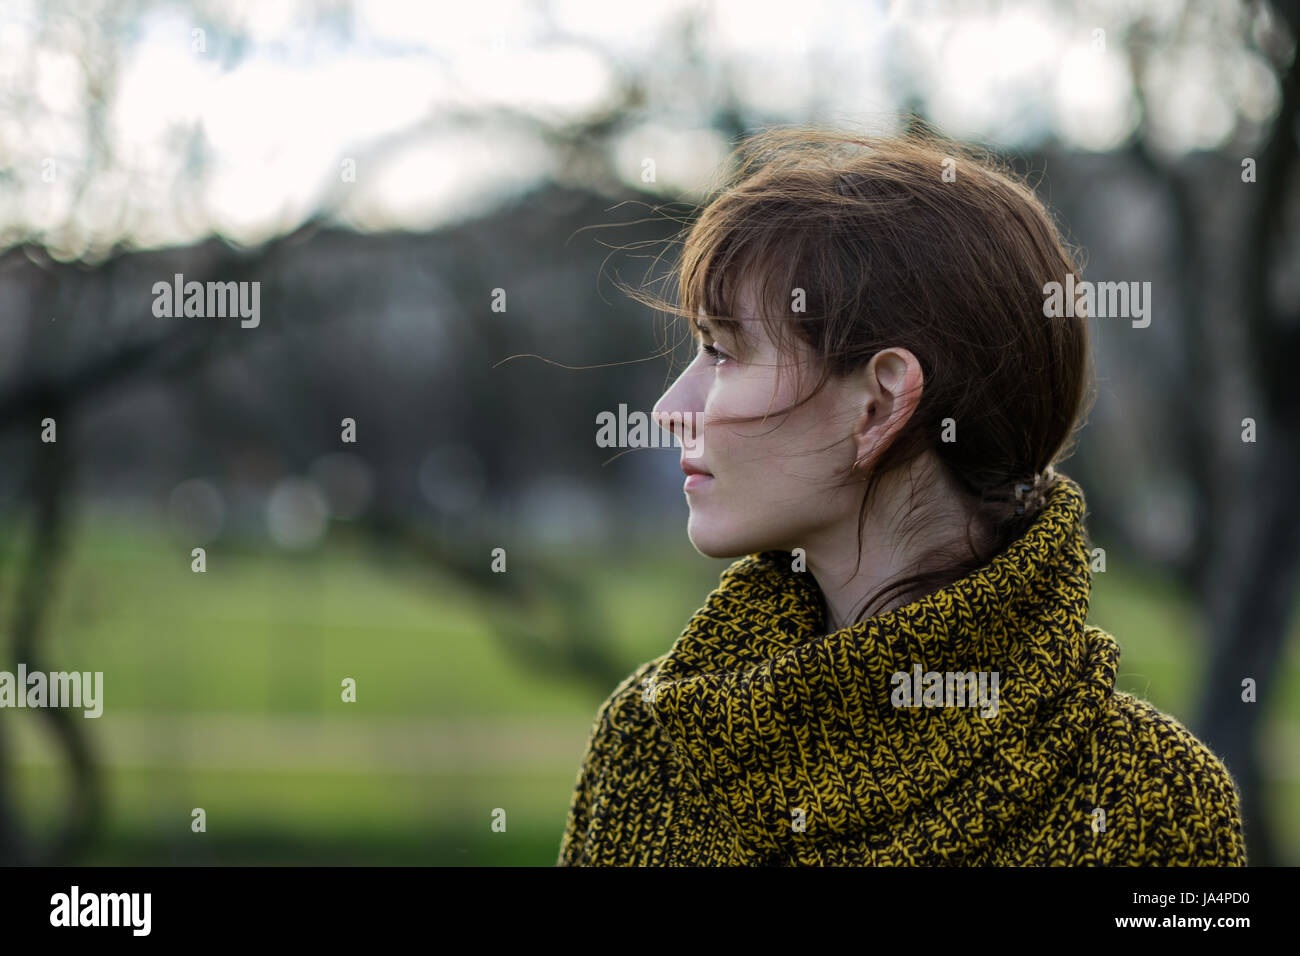 Portrait of a lonely girl in profile. Stock Photo